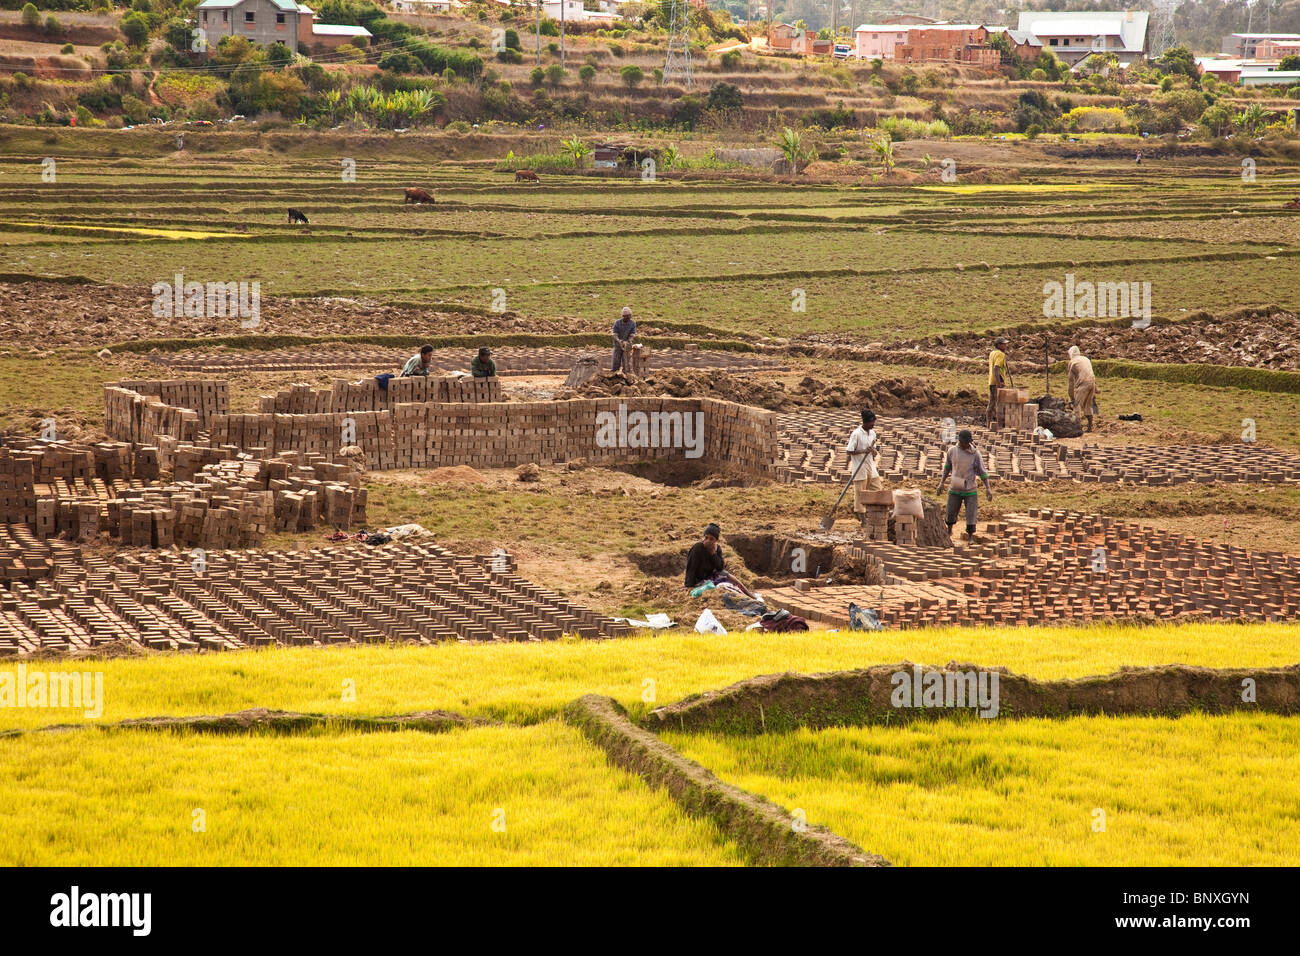 Paddyfields with new growth of rice, brickmaking,  grazing livestock. Typical rural scene, Madagascar Stock Photo